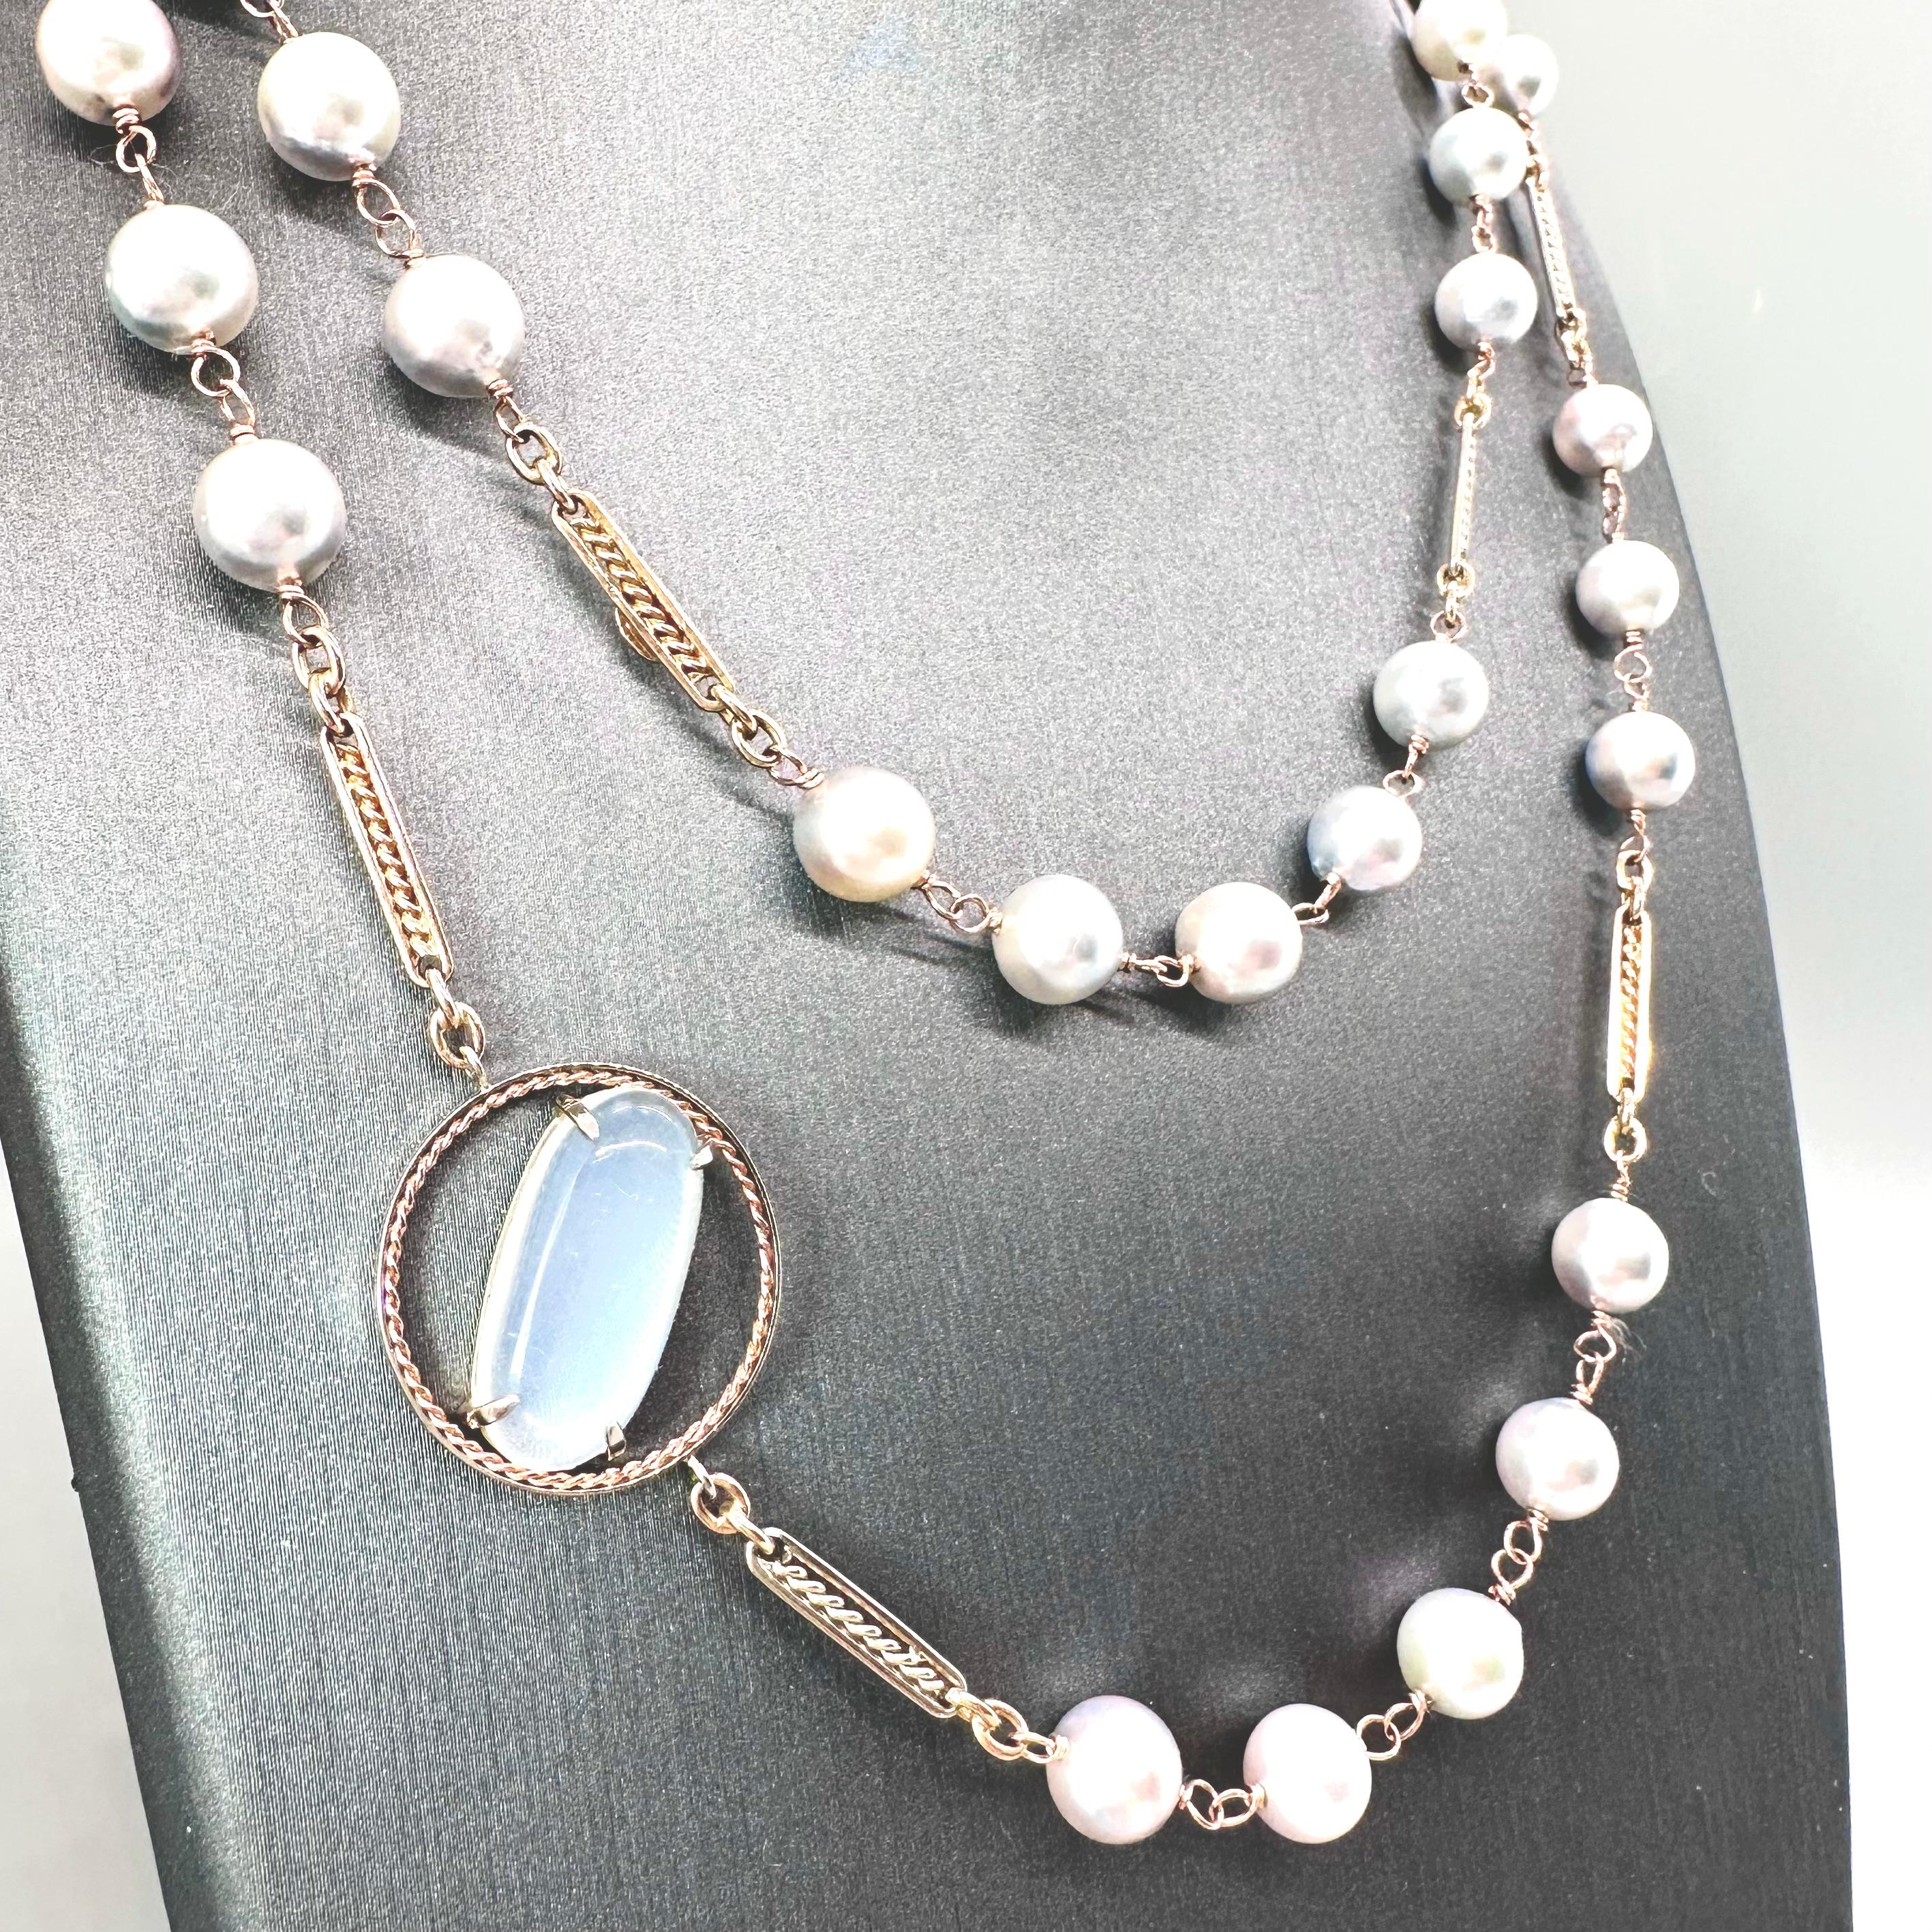 Contemporary 6.61 carat blue moonstone, Akoya pearls on a handmade 14k necklace by G&G Studio For Sale